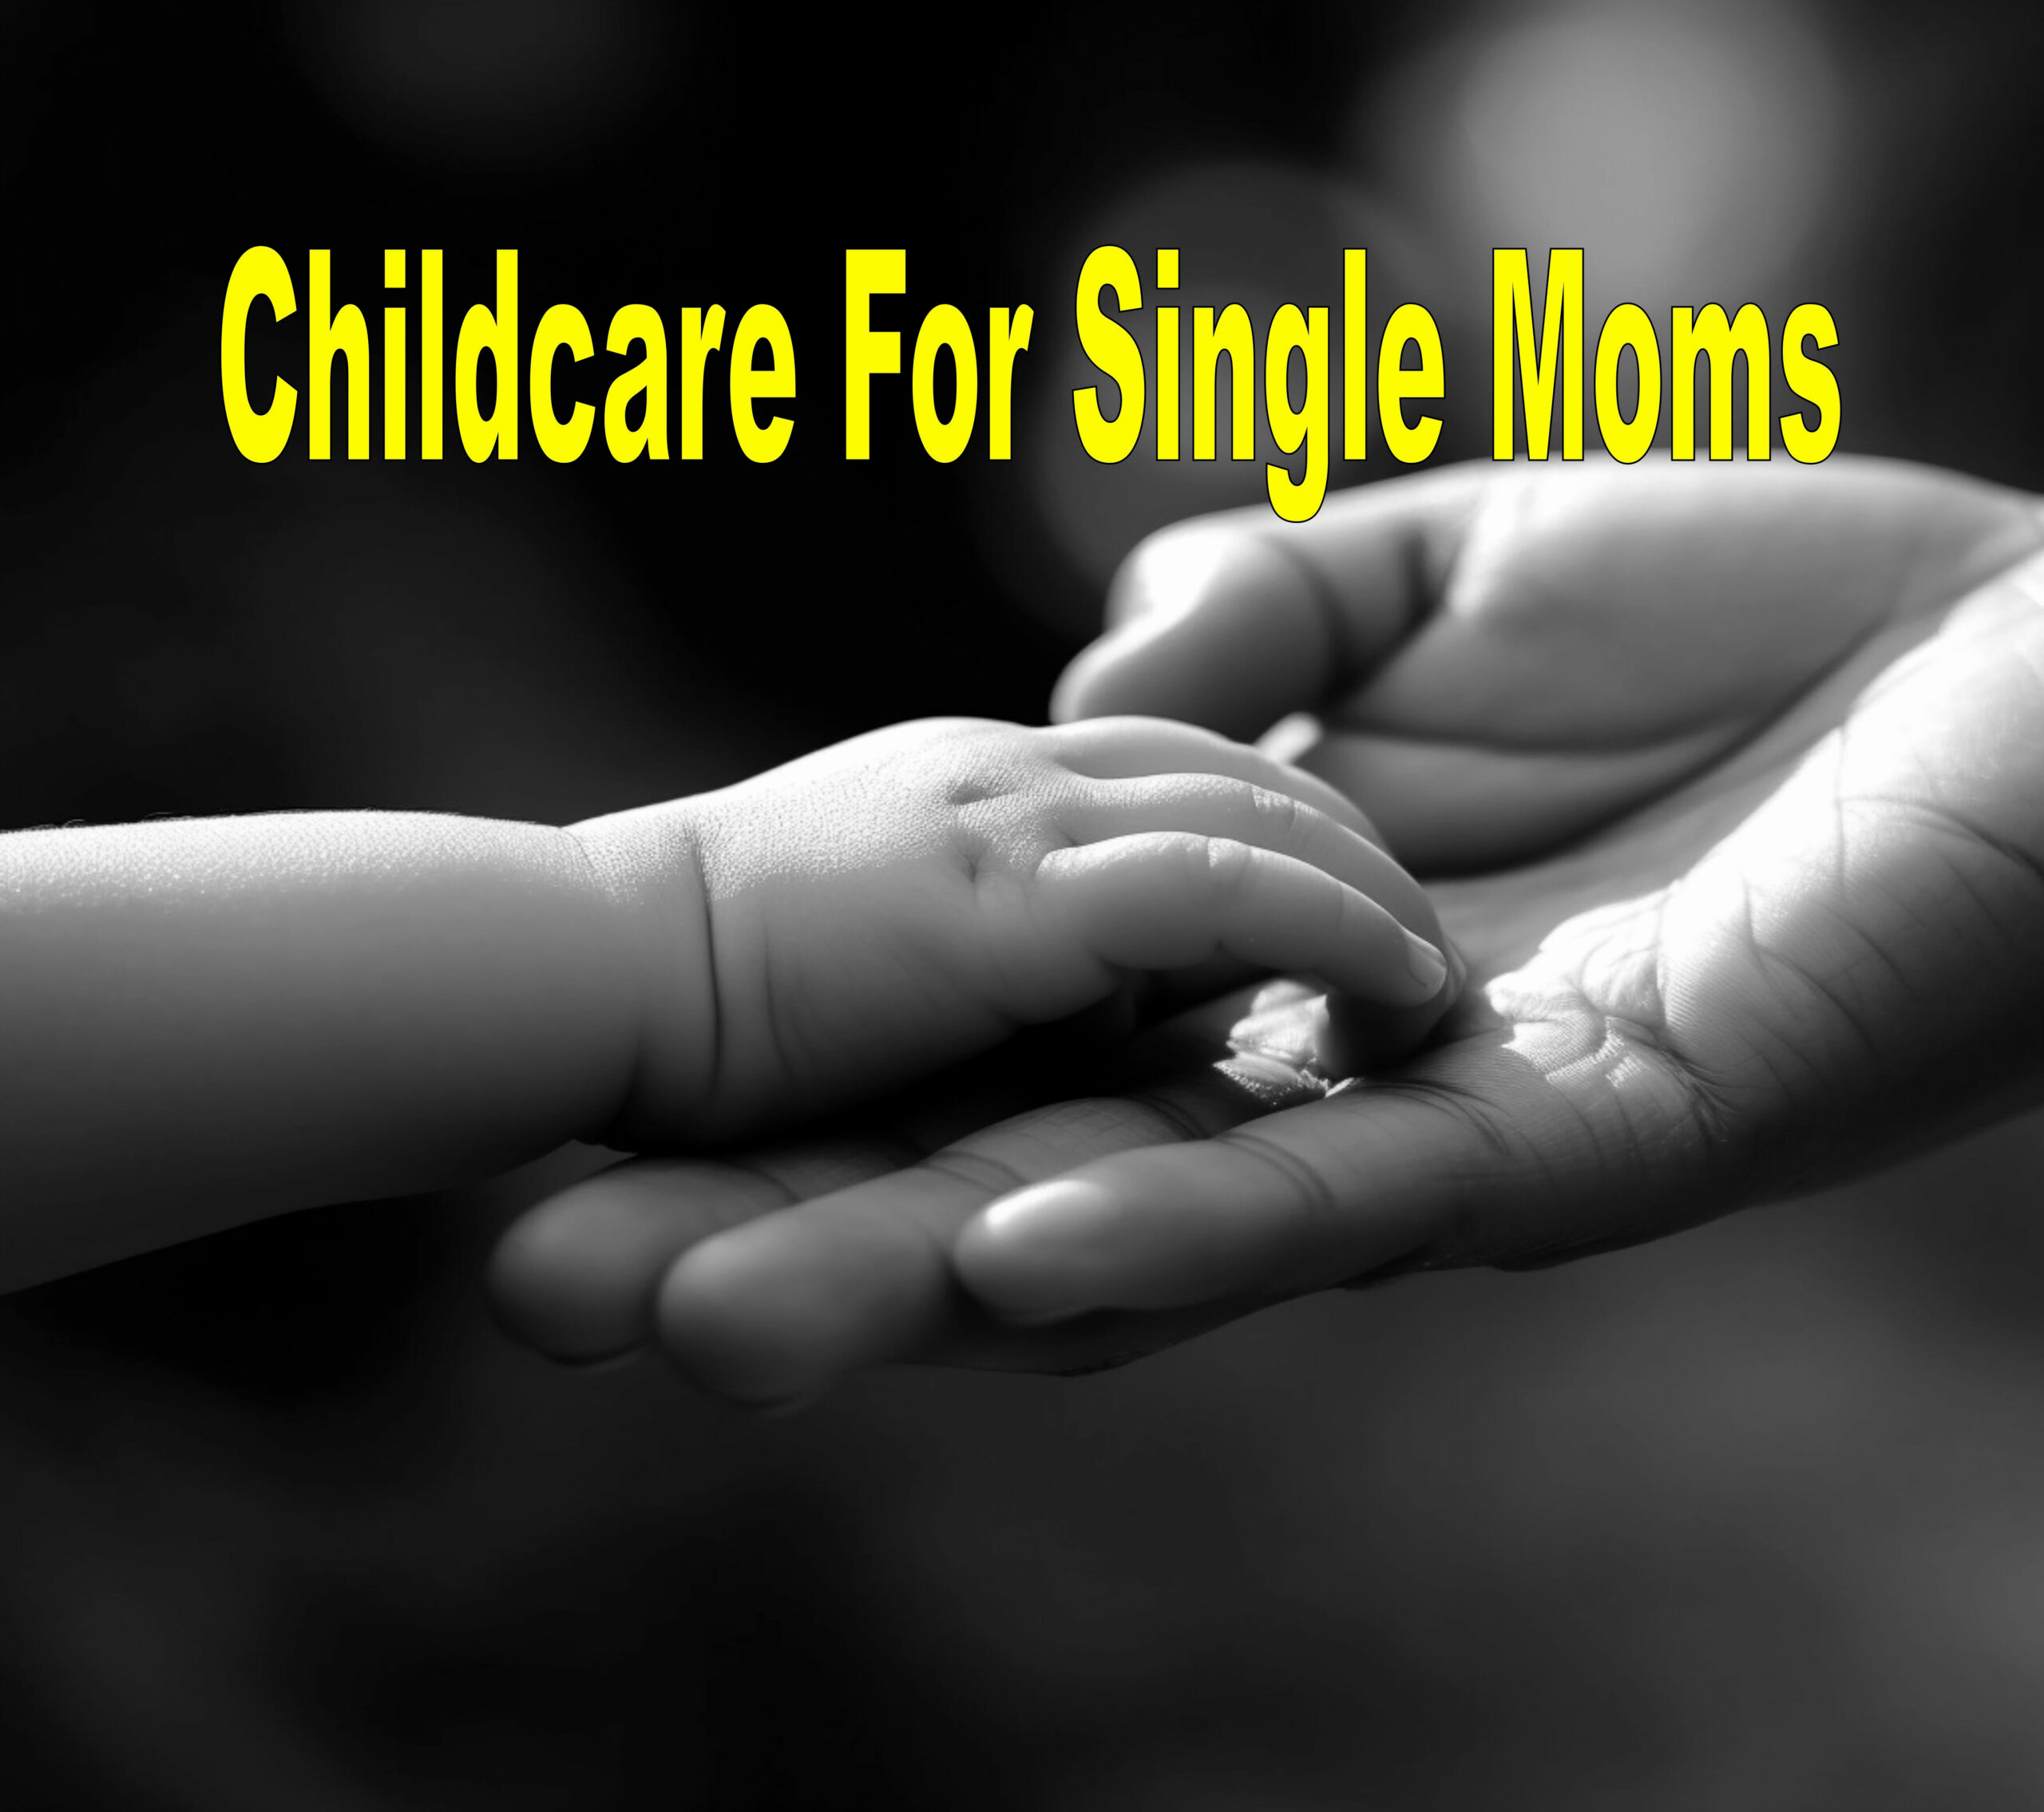 Childcare For Single Moms